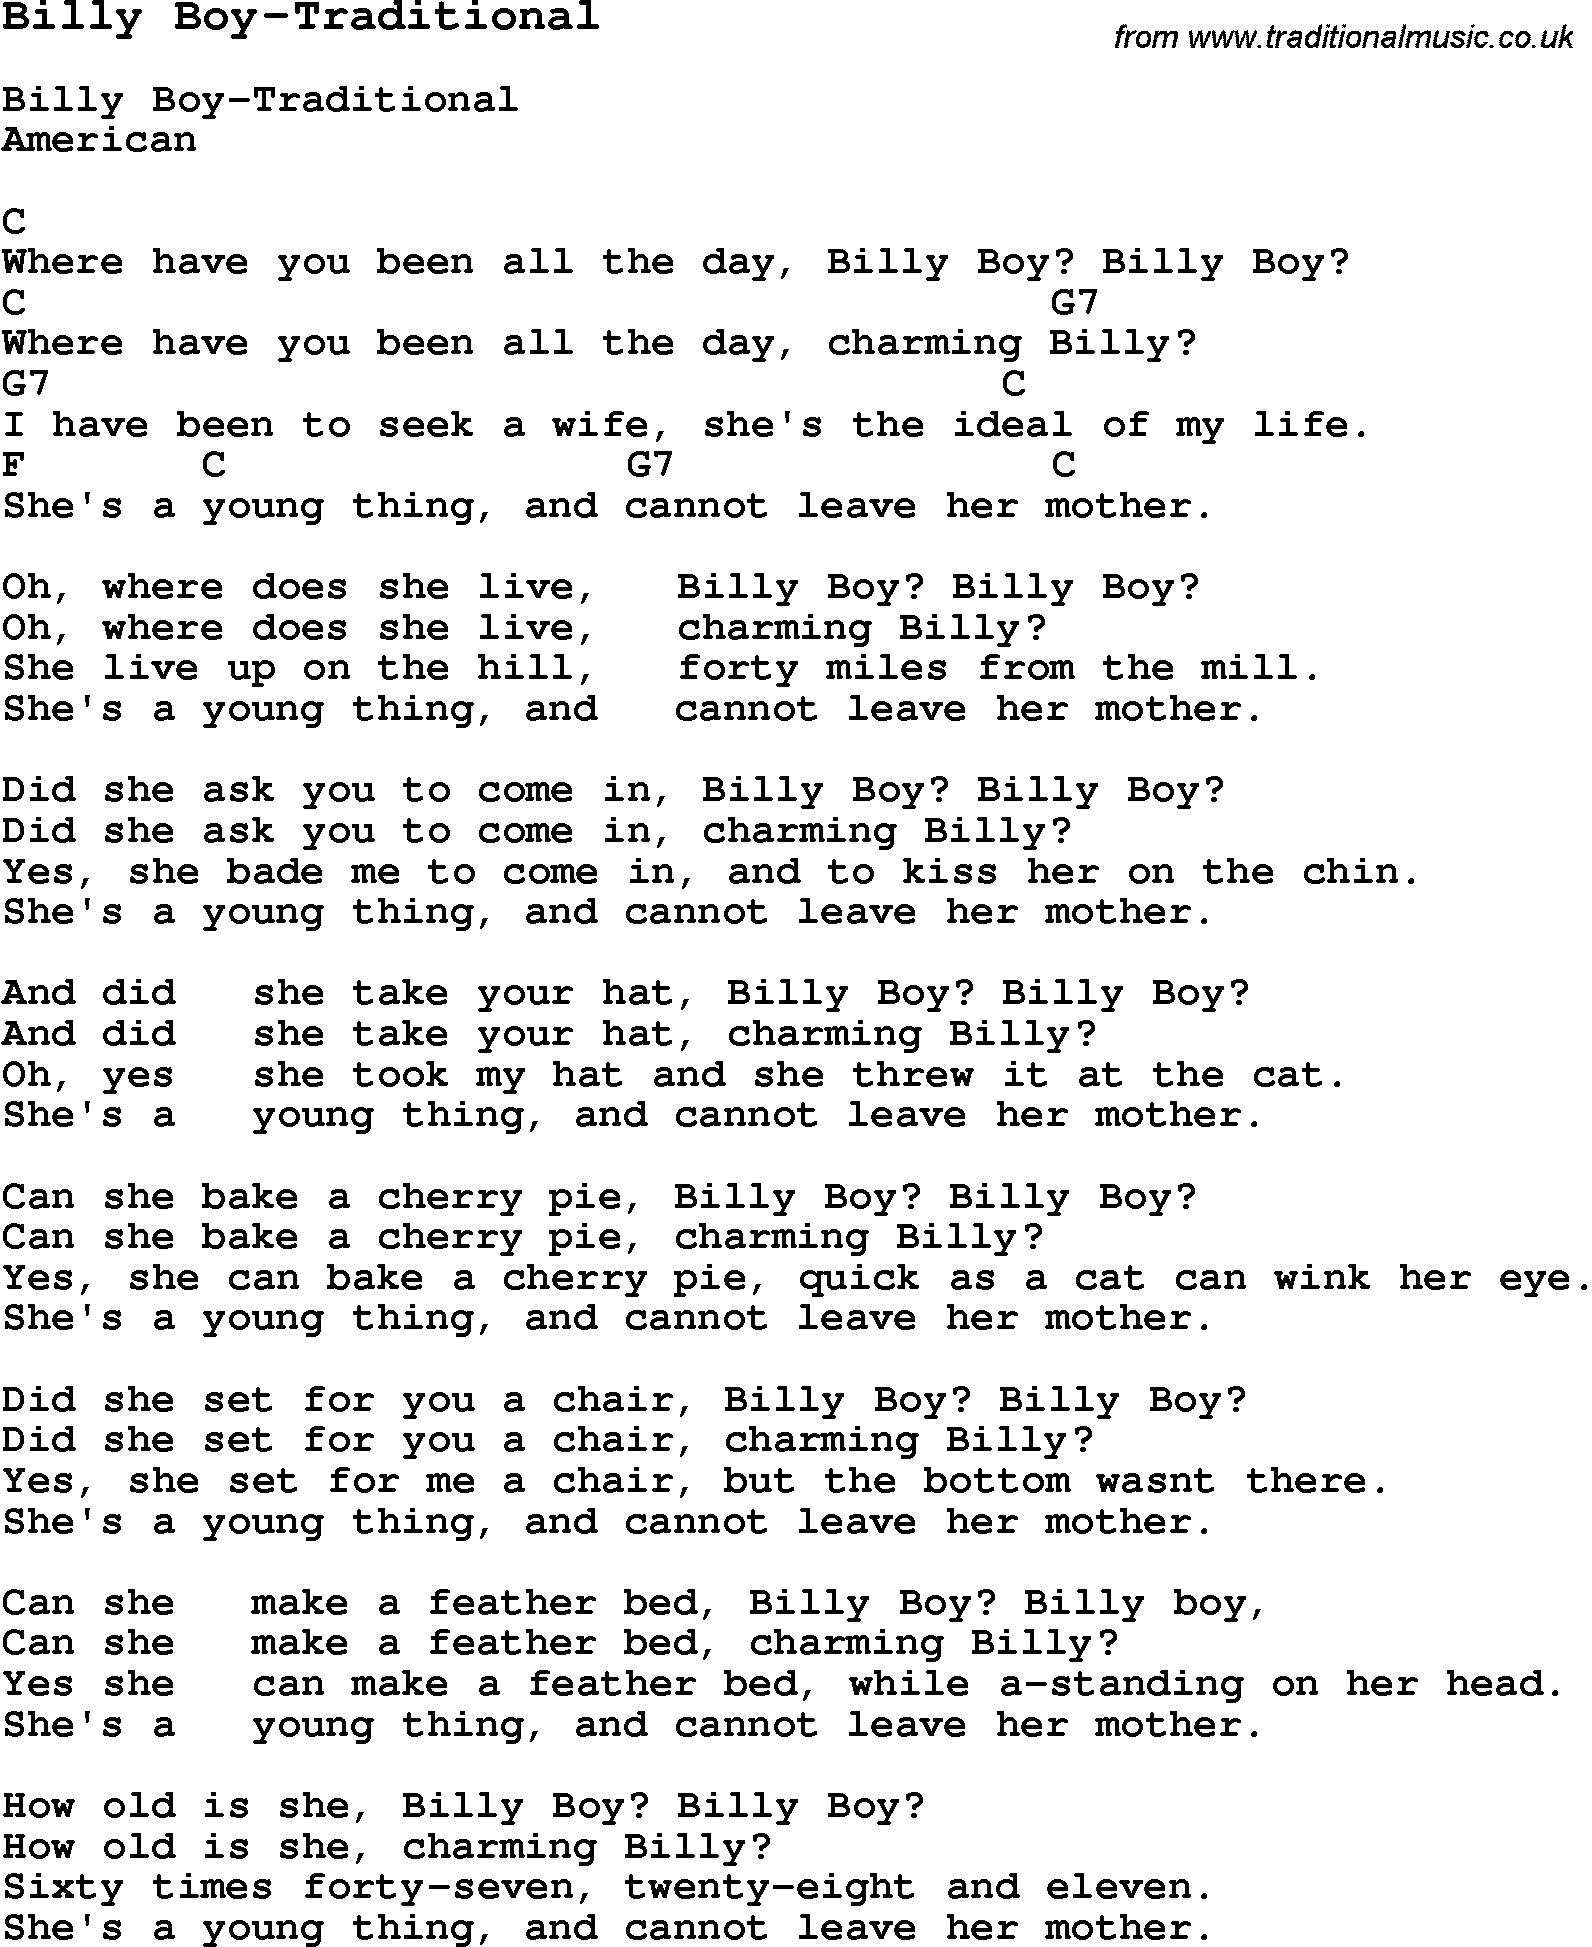 Summer-Camp Song, Billy Boy-Traditional, with lyrics and chords for Ukulele, Guitar Banjo etc.